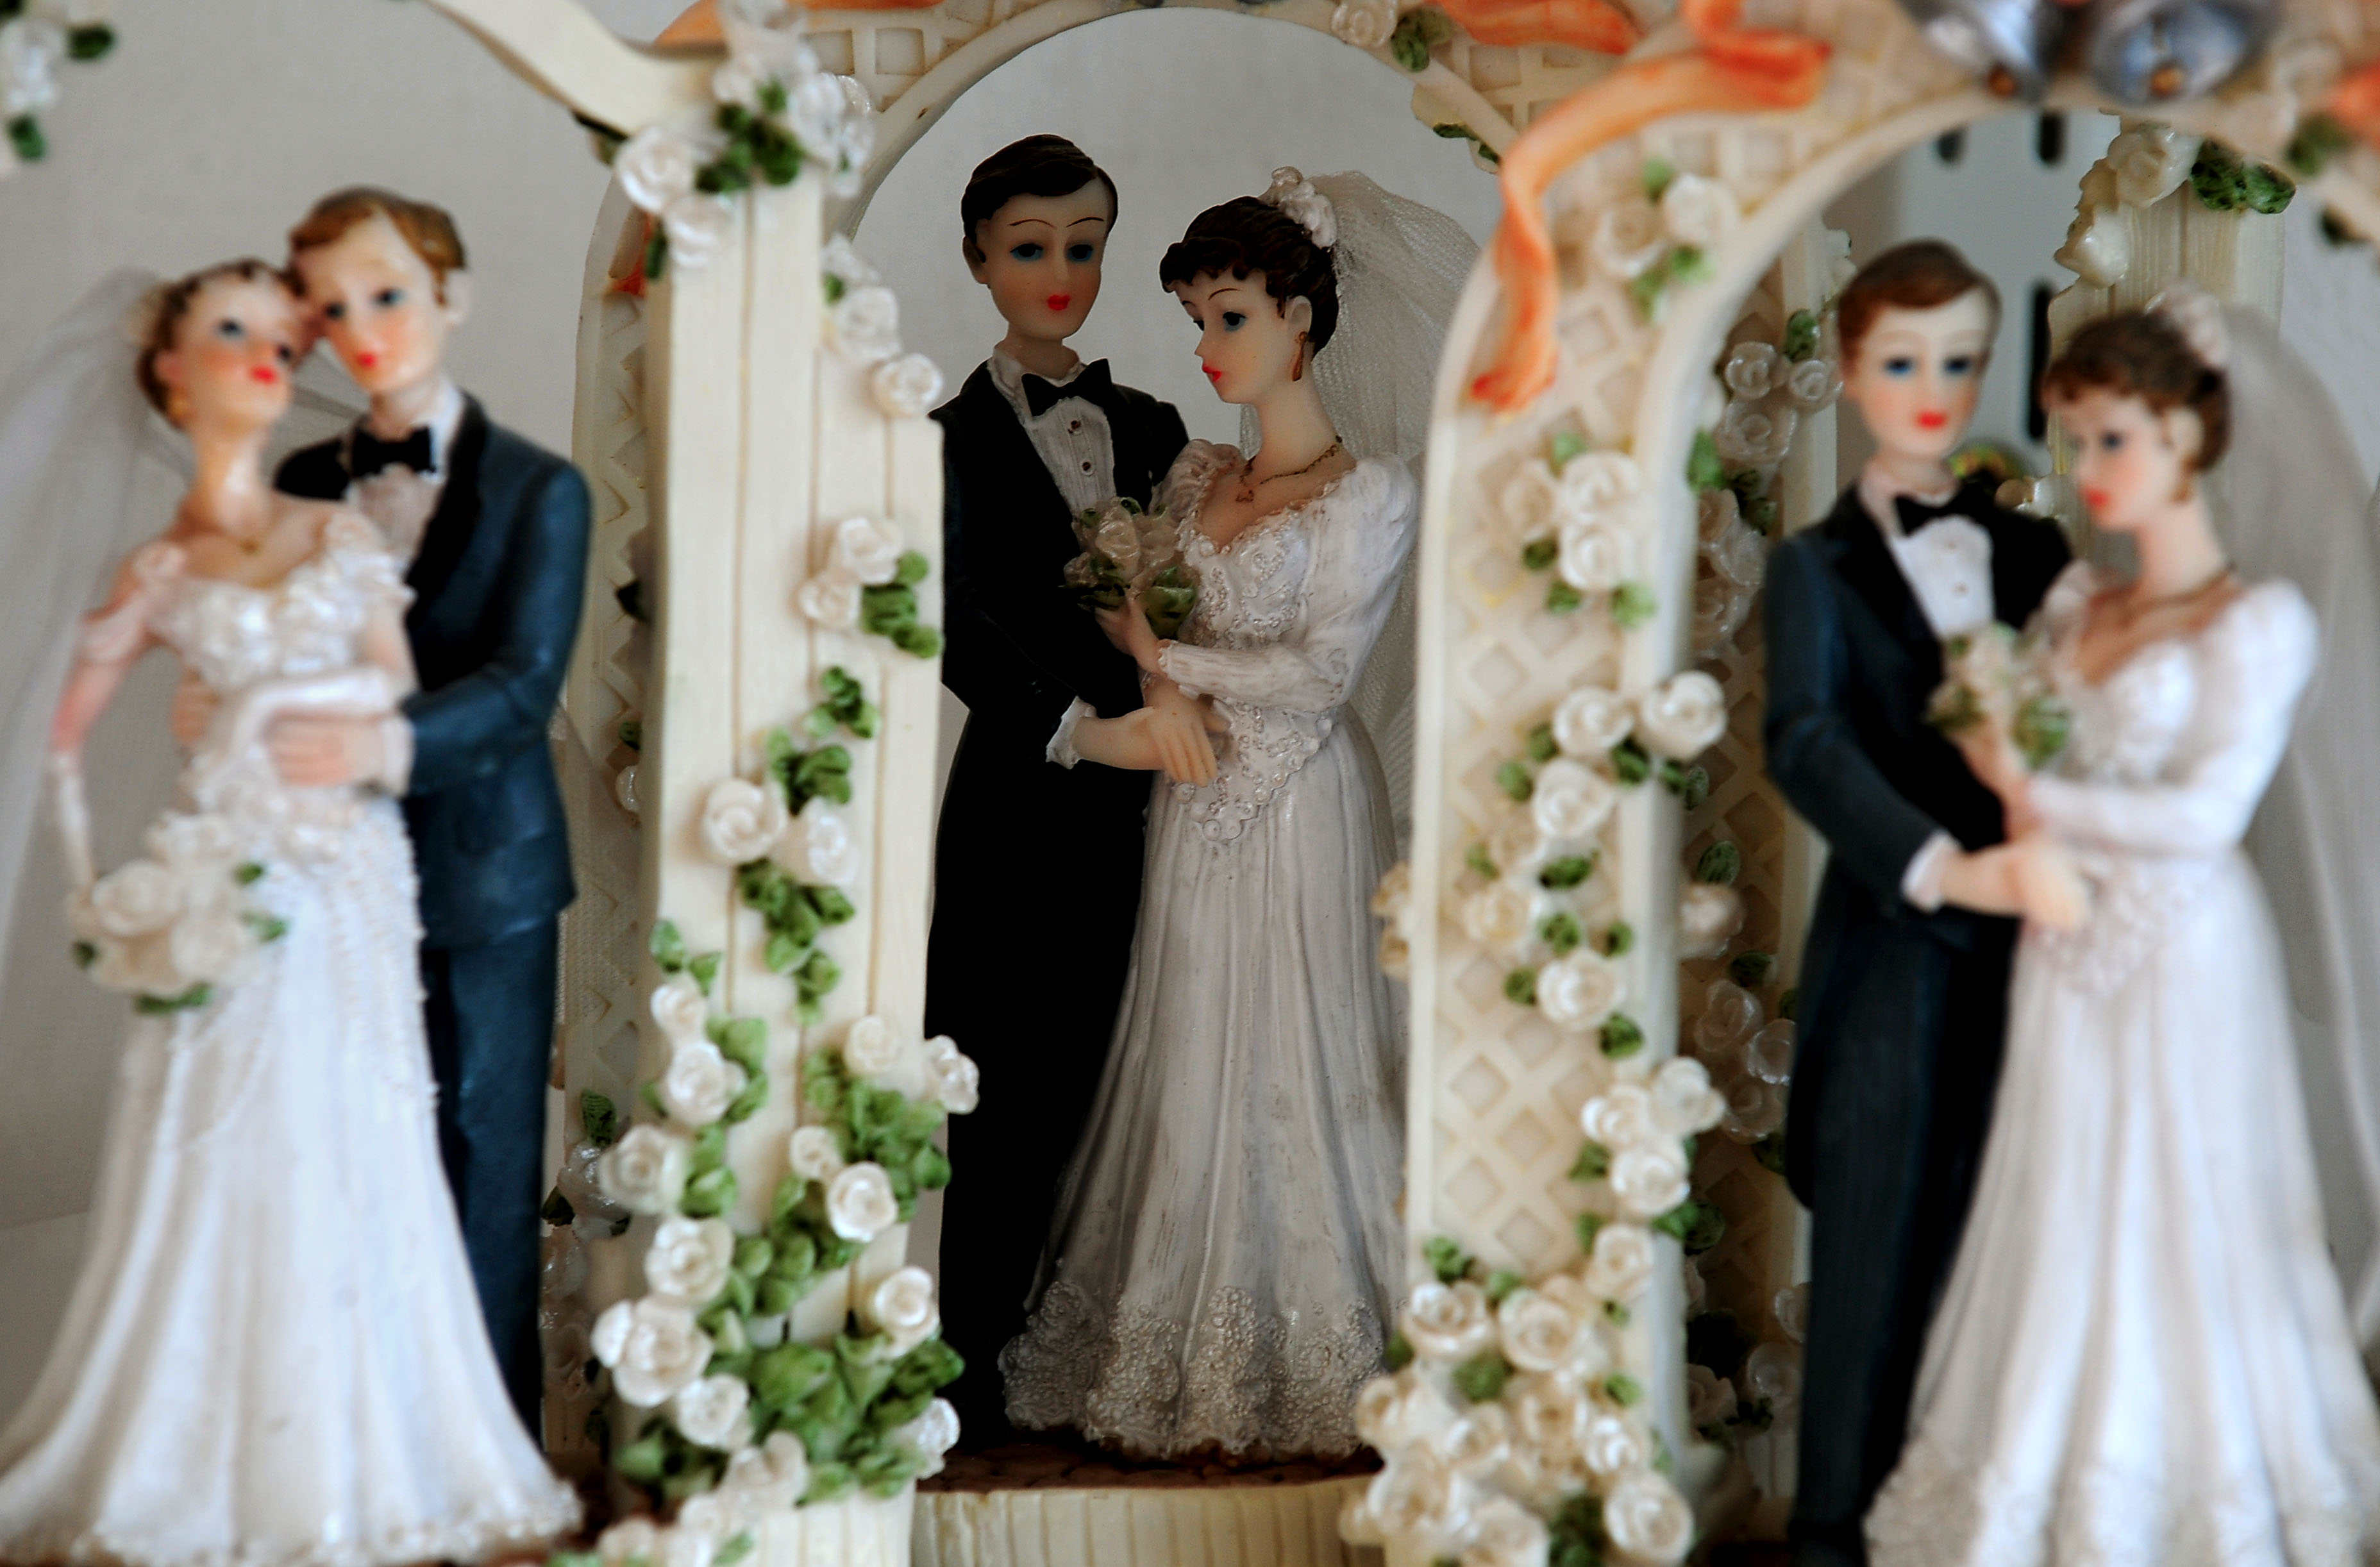 a trio of bride and groom figures on a wedding cake